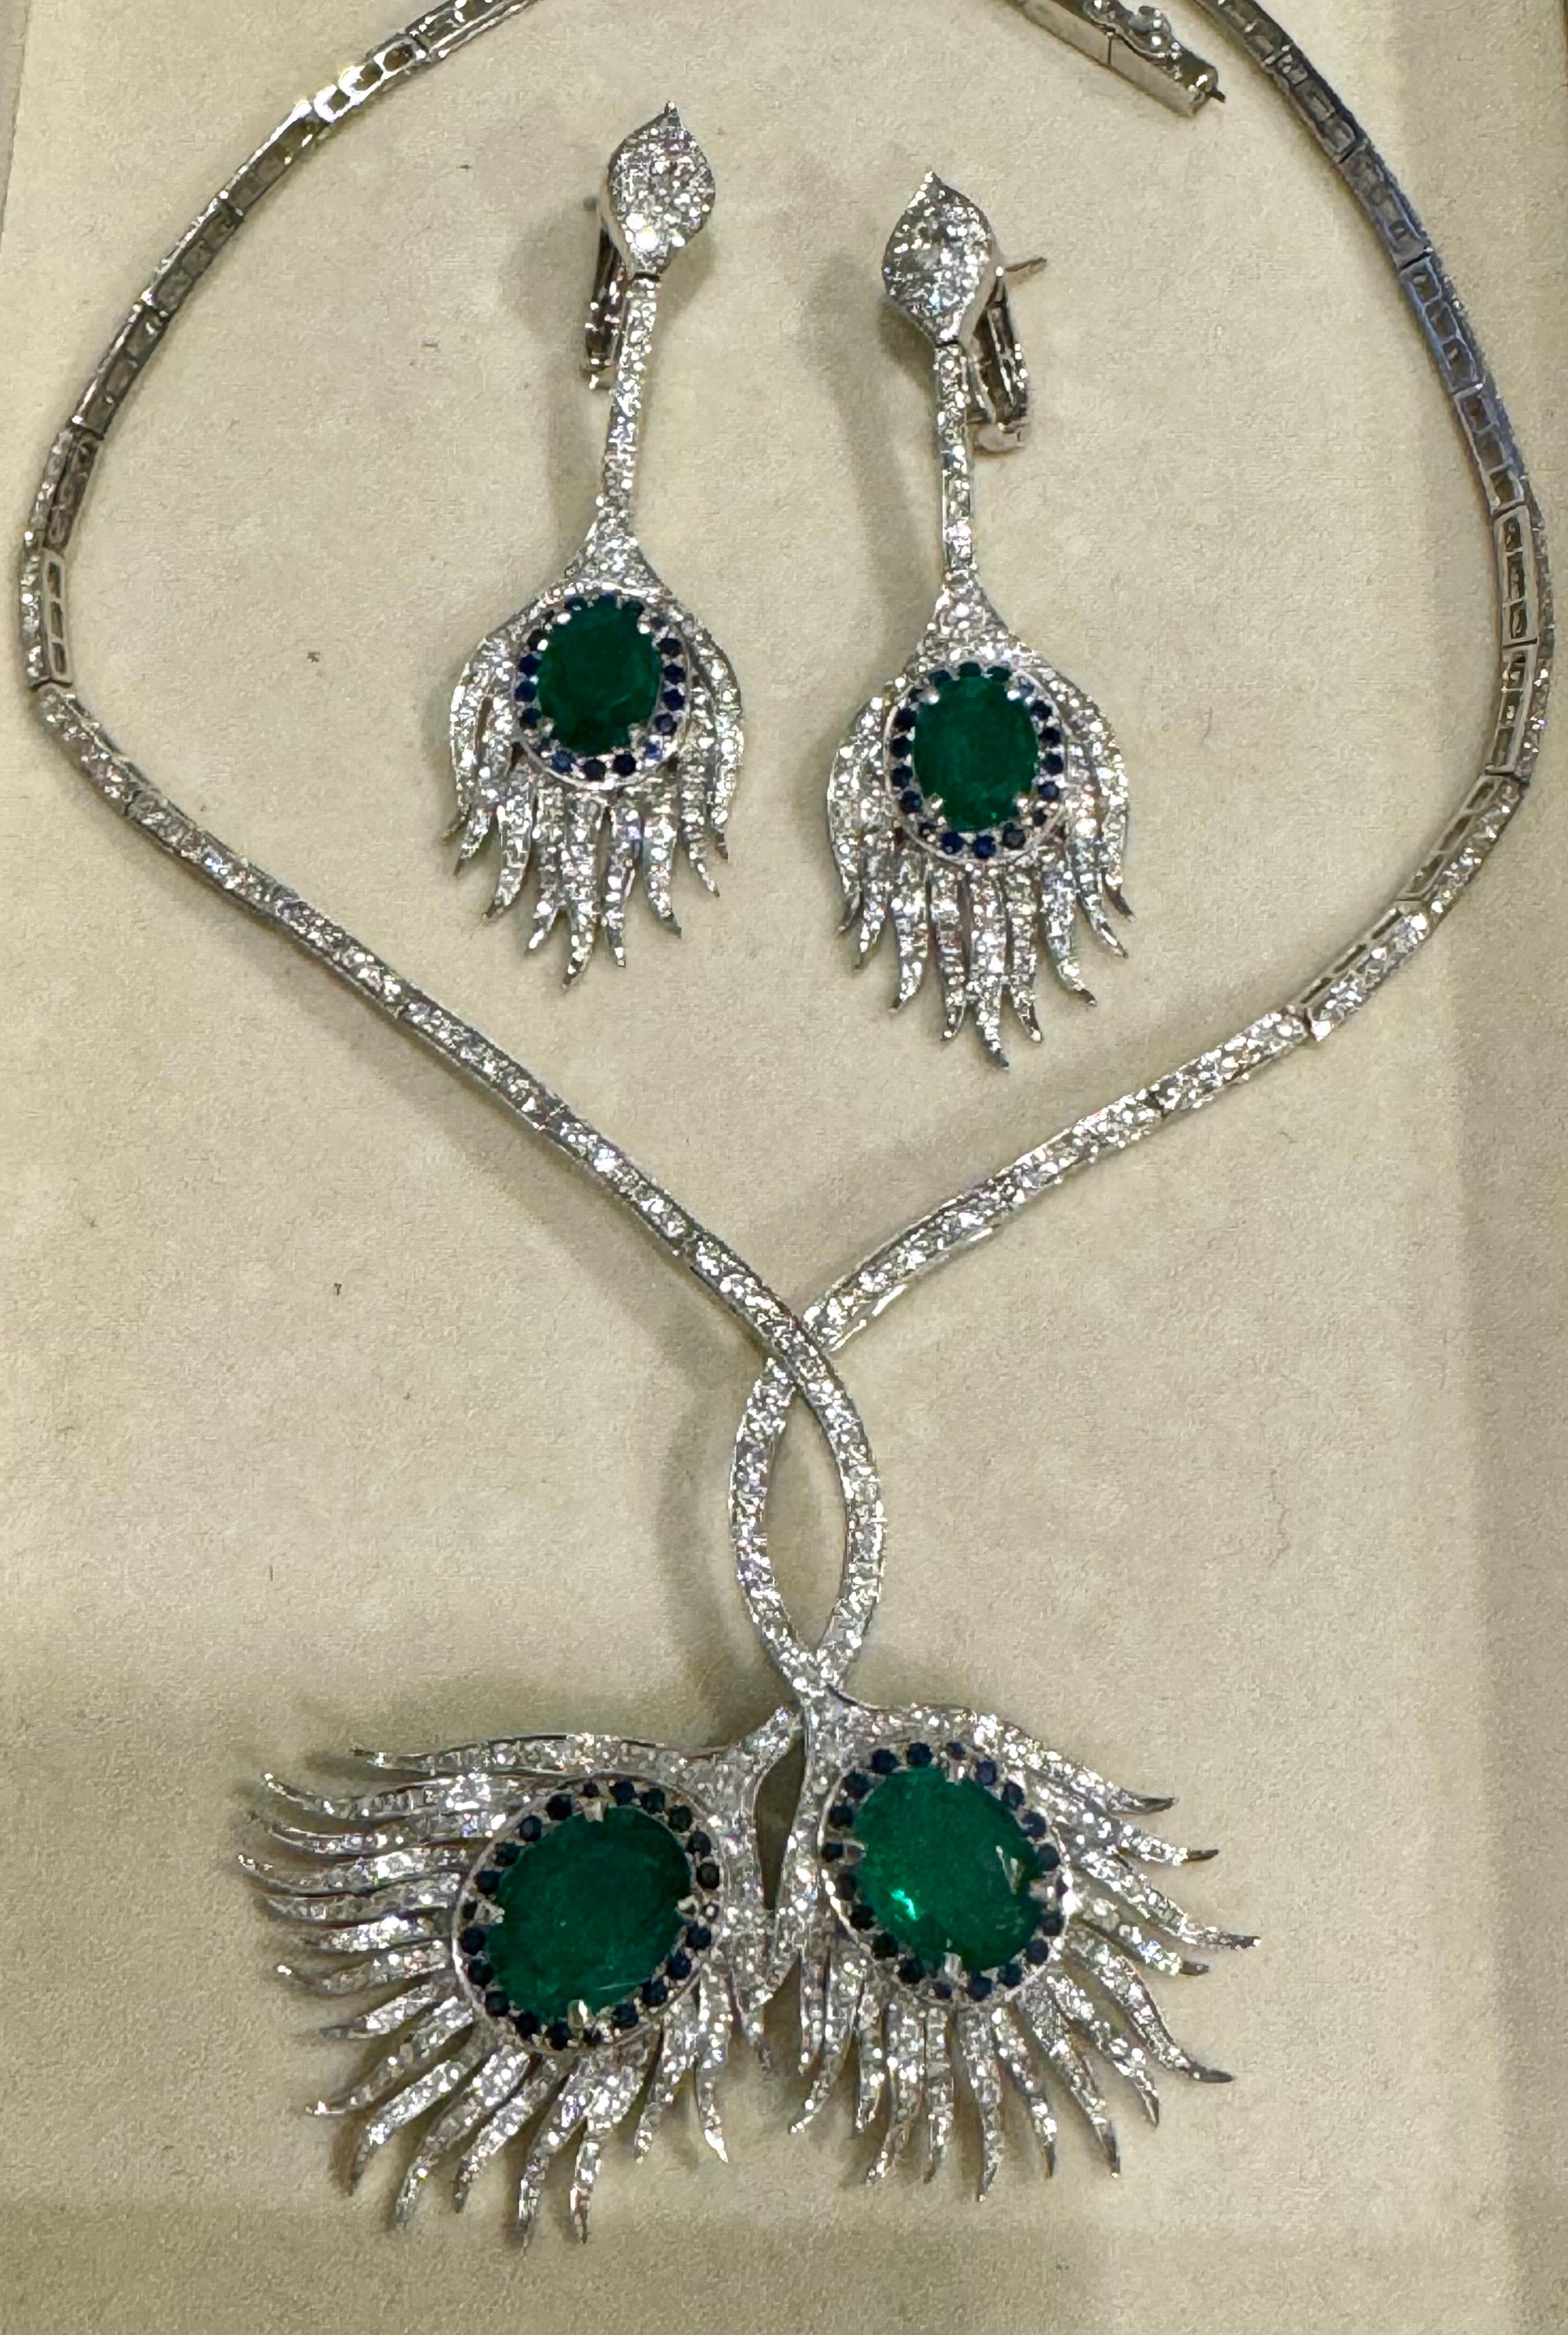 GIA Certified 20ct Zambian Emerald & 15ct Diamond Necklace Earring Suite 18KWG For Sale 2